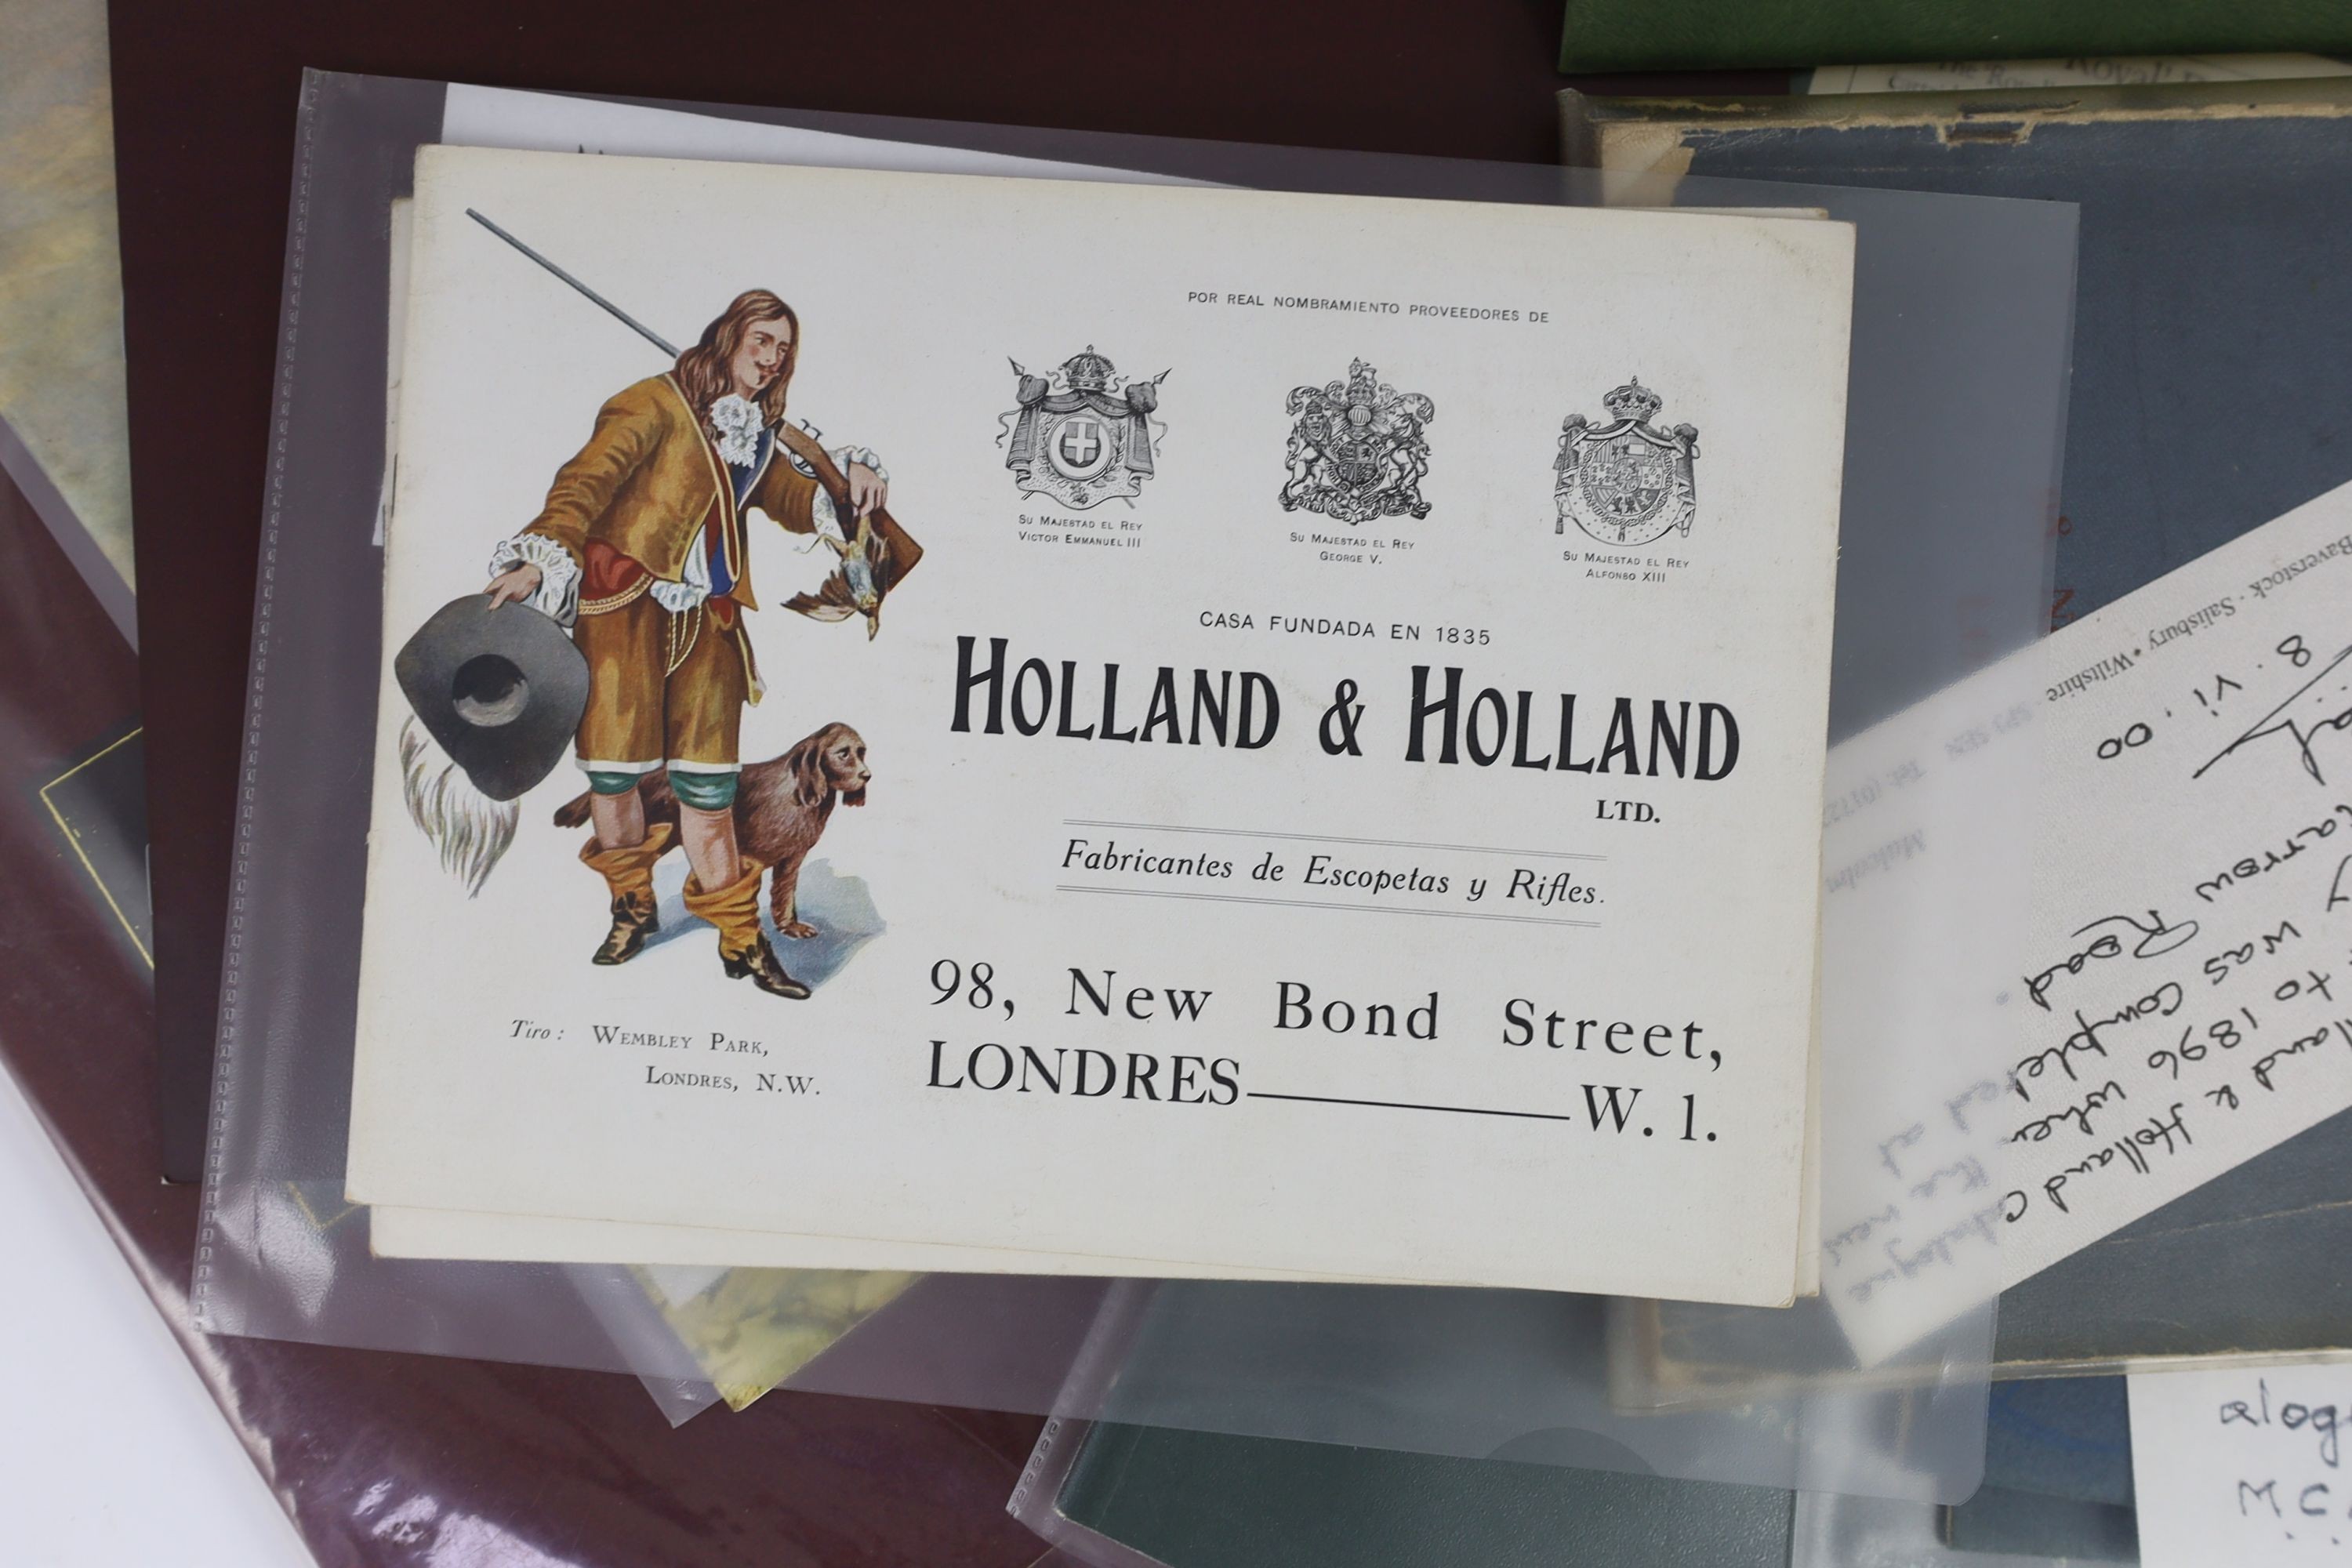 [Trade Catalogues]. Holland & Holland. Guns & Rifles. London, n.d. [c. 1893]. Dated from adverts on pages 4 and 5. Original printed wrappers, soiled and worn, contents generally clean. Holland & Holland Ltd. Fabricantes